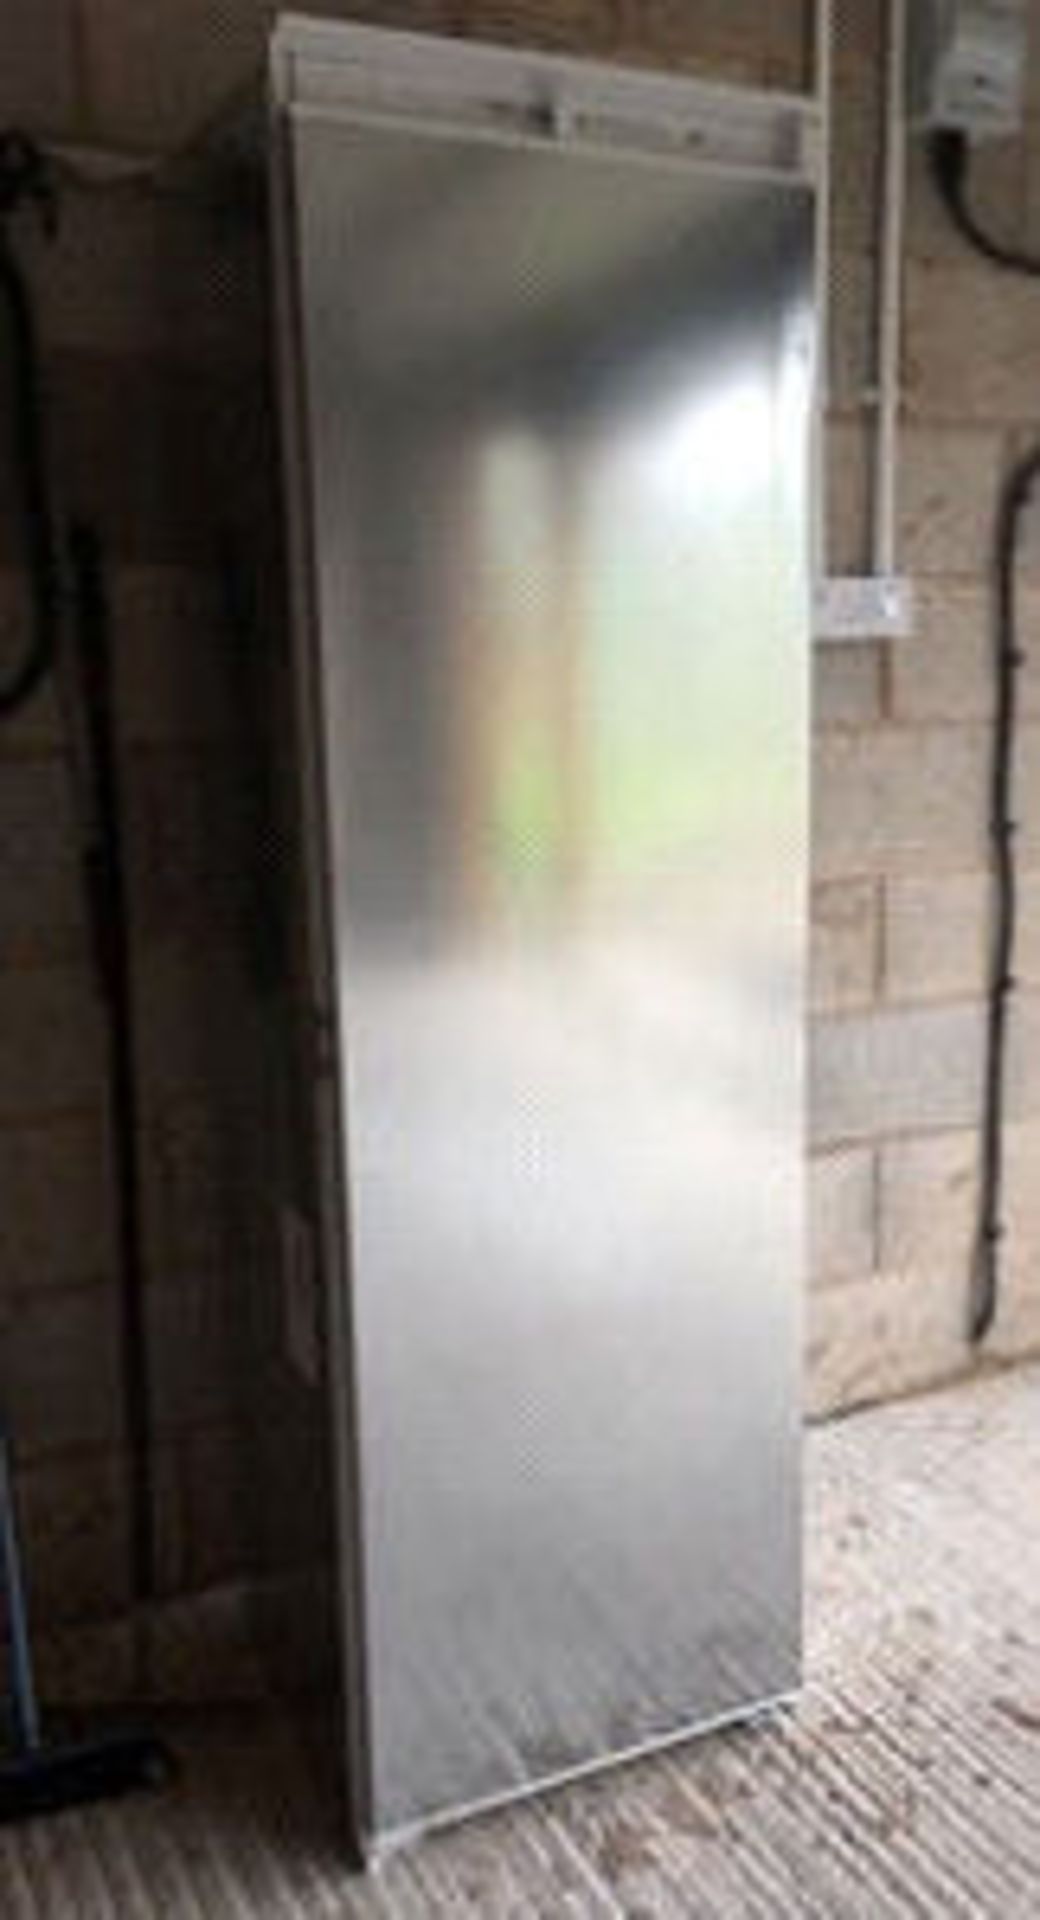 1 x NEFF KI1812S30G Integrated Tall Fridge - Only 6 Months Old - CL252 - Location: Longton, PR4 - NO - Image 2 of 6